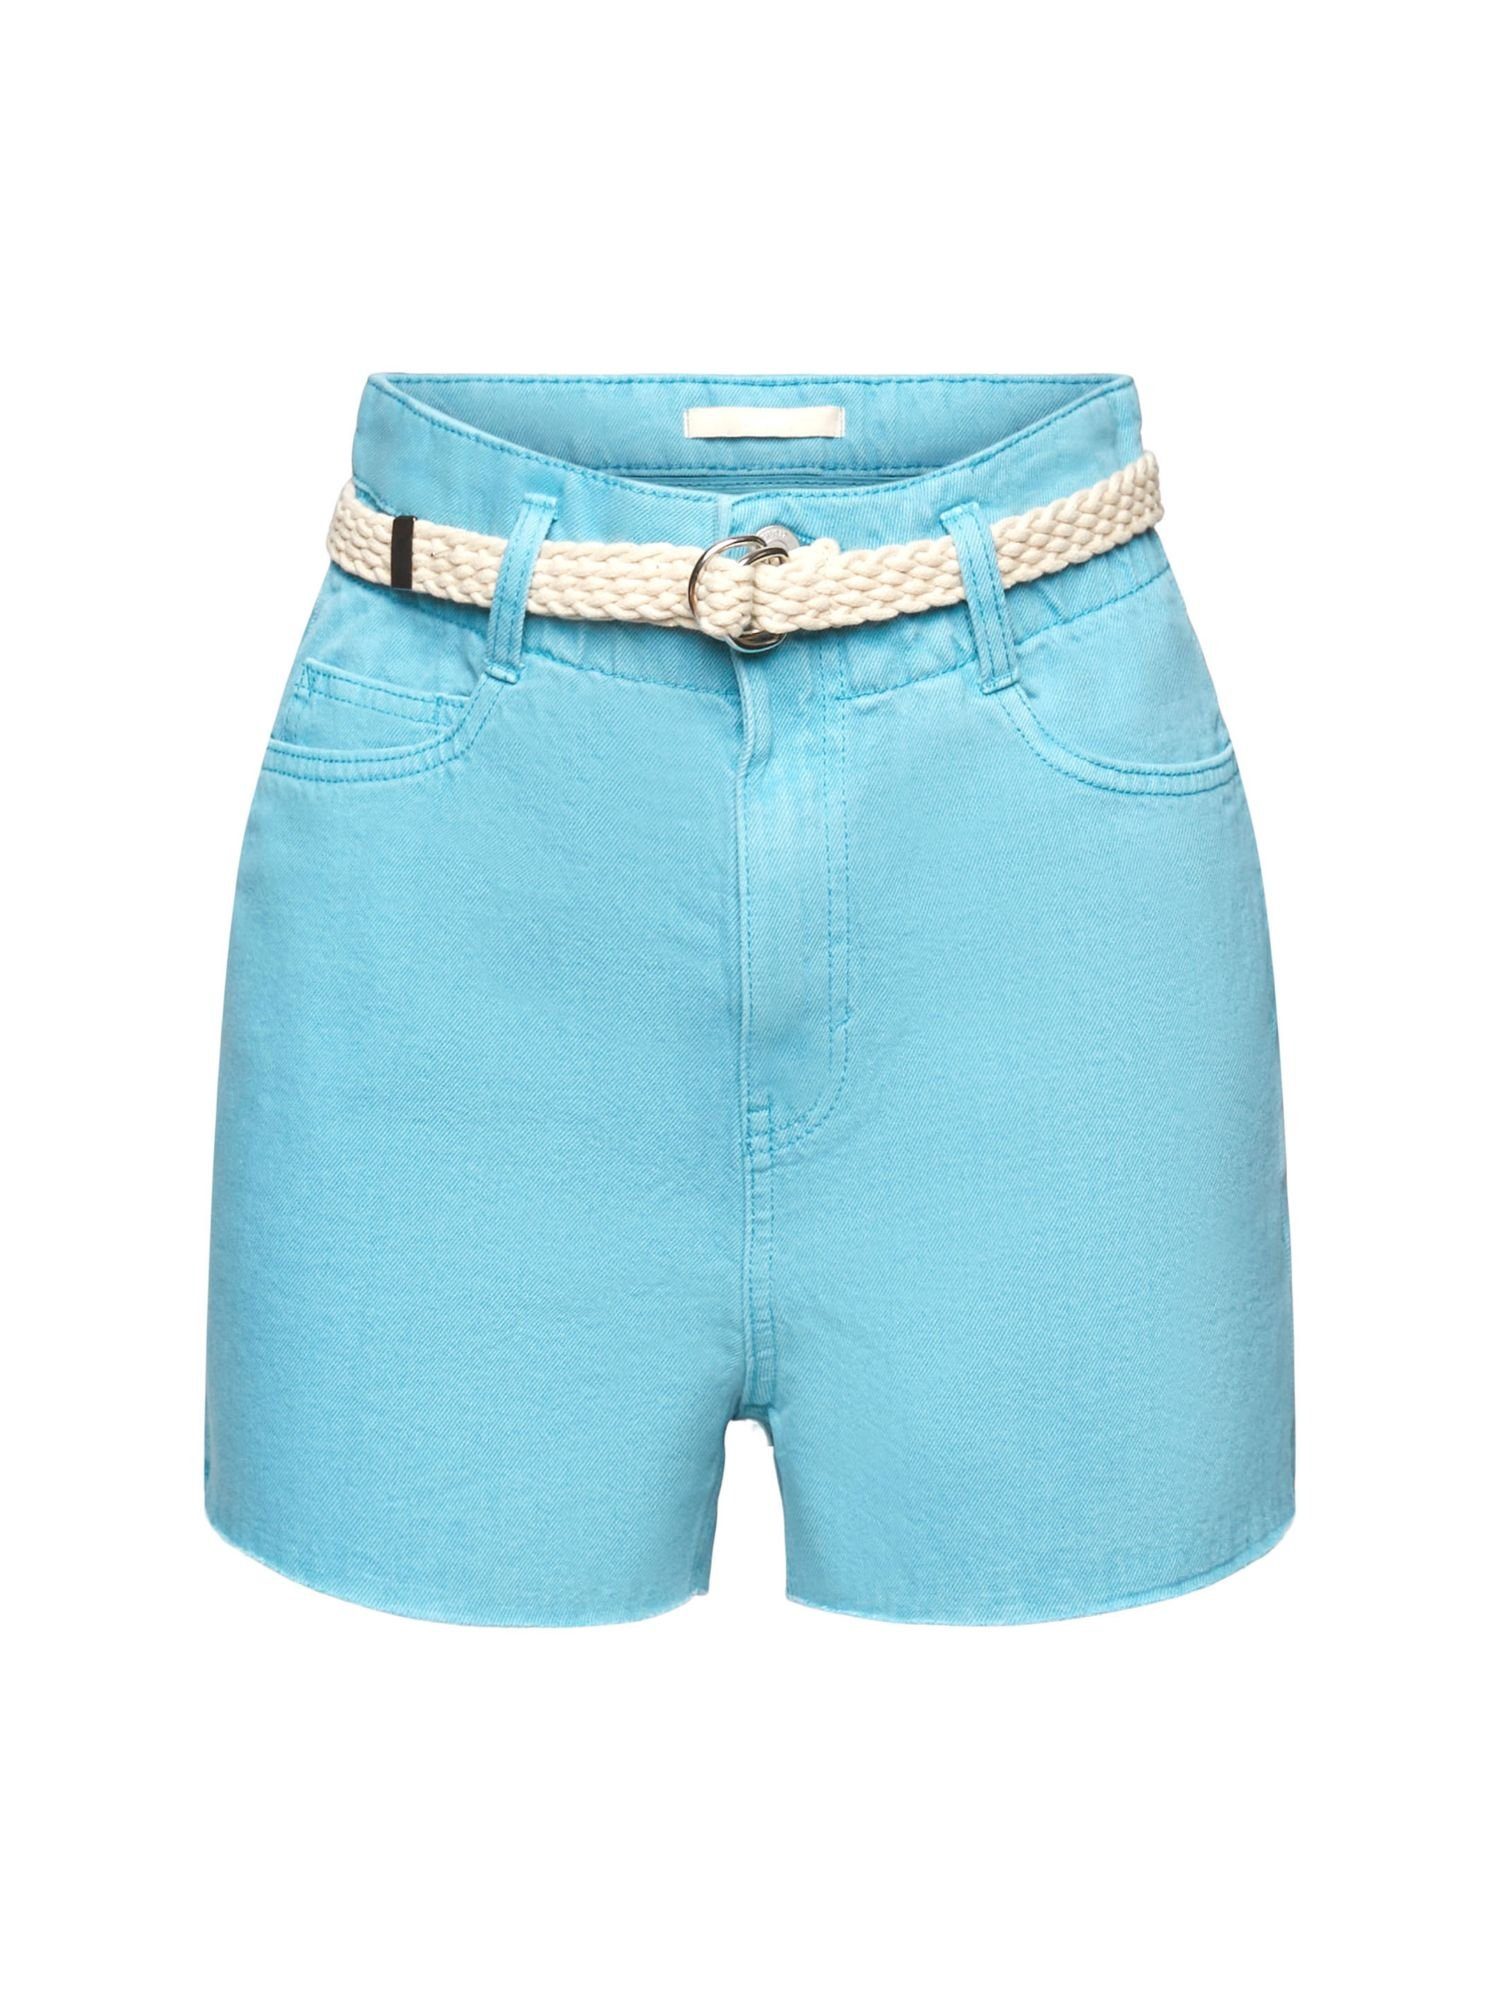 edc by Esprit Shorts Optik TURQUOISE abgeschnittener Jeansshorts in (1-tlg)